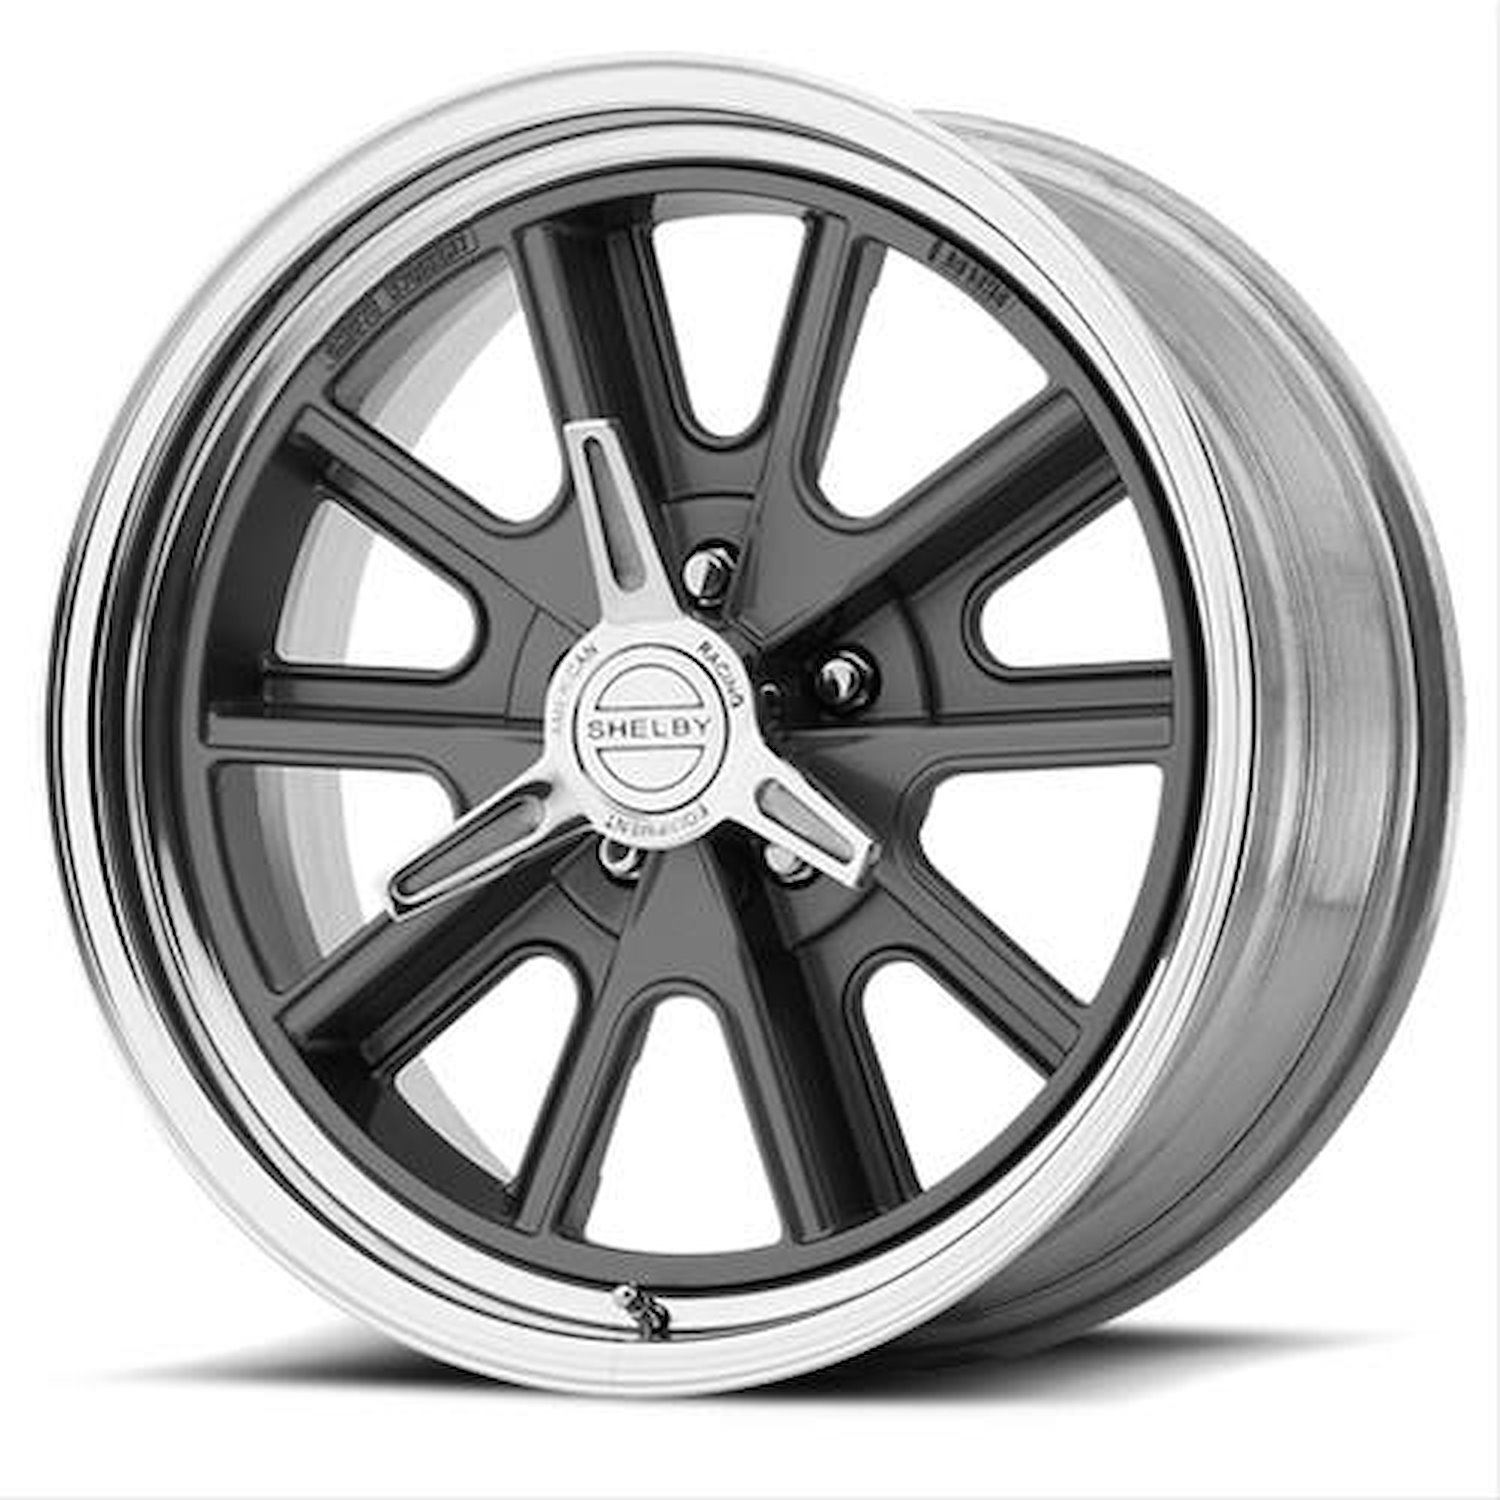 AMERICAN RACING 427 SHELBY COBRA TWO-PIECE MAG GRAY CENTER POLISHED BARREL 15 x 7 5x4.5 -12 3.53